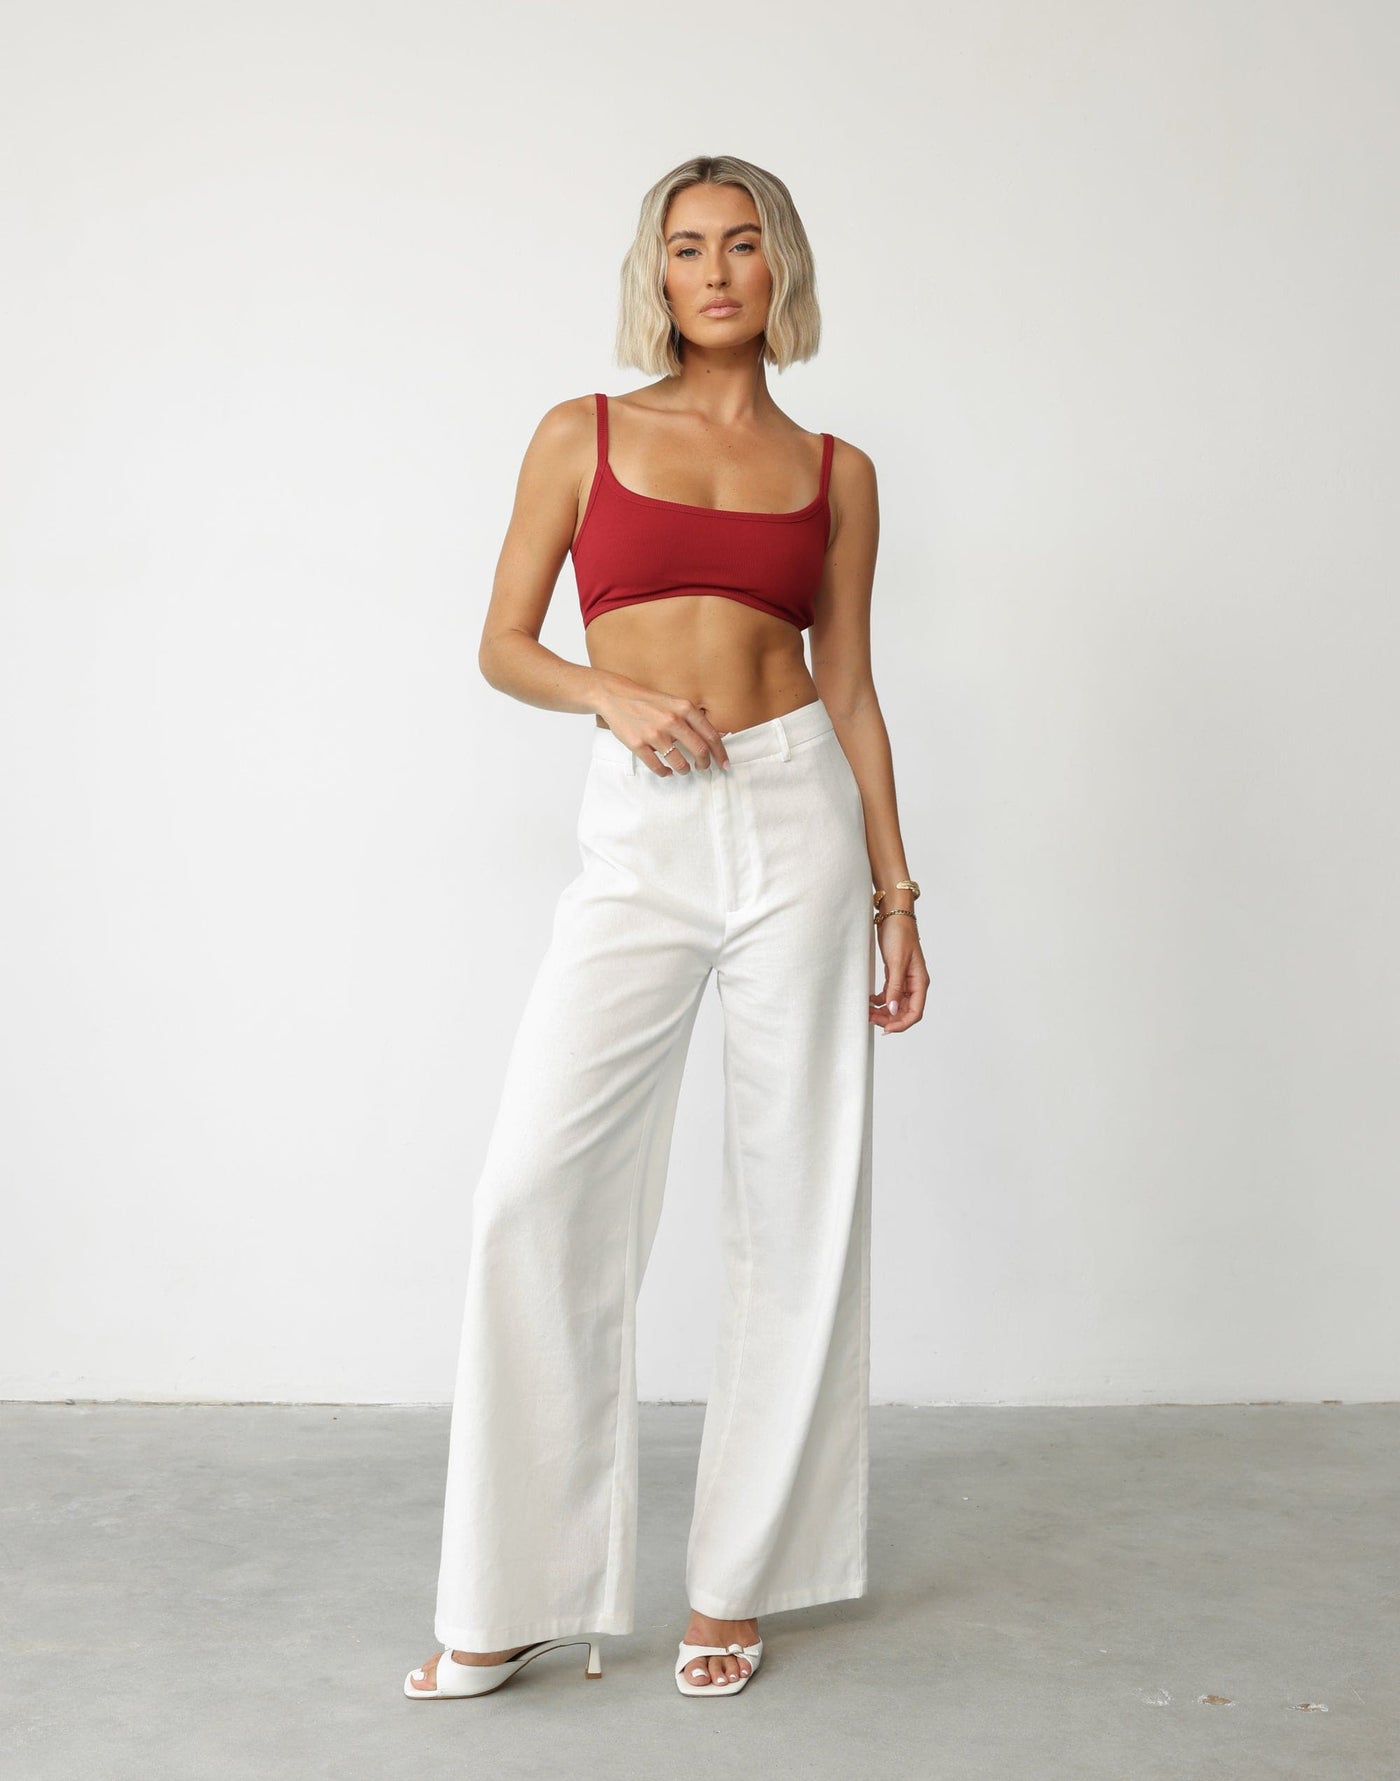 Malina Crop Top (Cherry) | CHARCOAL Exclusive - Basic Ribbed Scoop Neck Lined Bralette Style Top - Women's Top - Charcoal Clothing